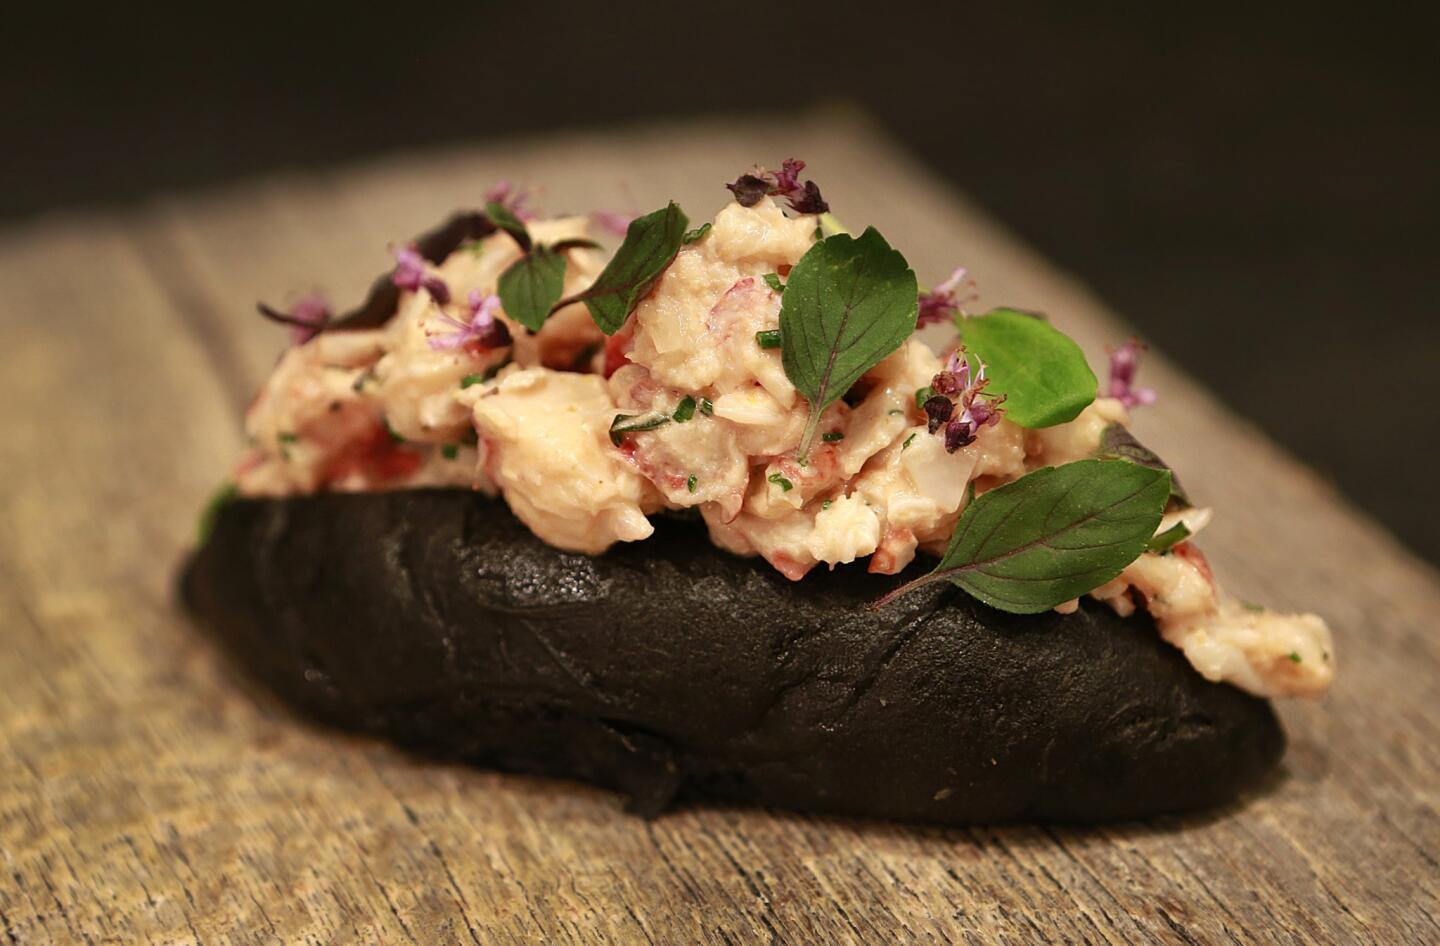 A lobster roll with green curry and Thai basil on a charcoal-infused bun at Hinoki & the Bird, a restaurant at the base of a Century City condo tower.